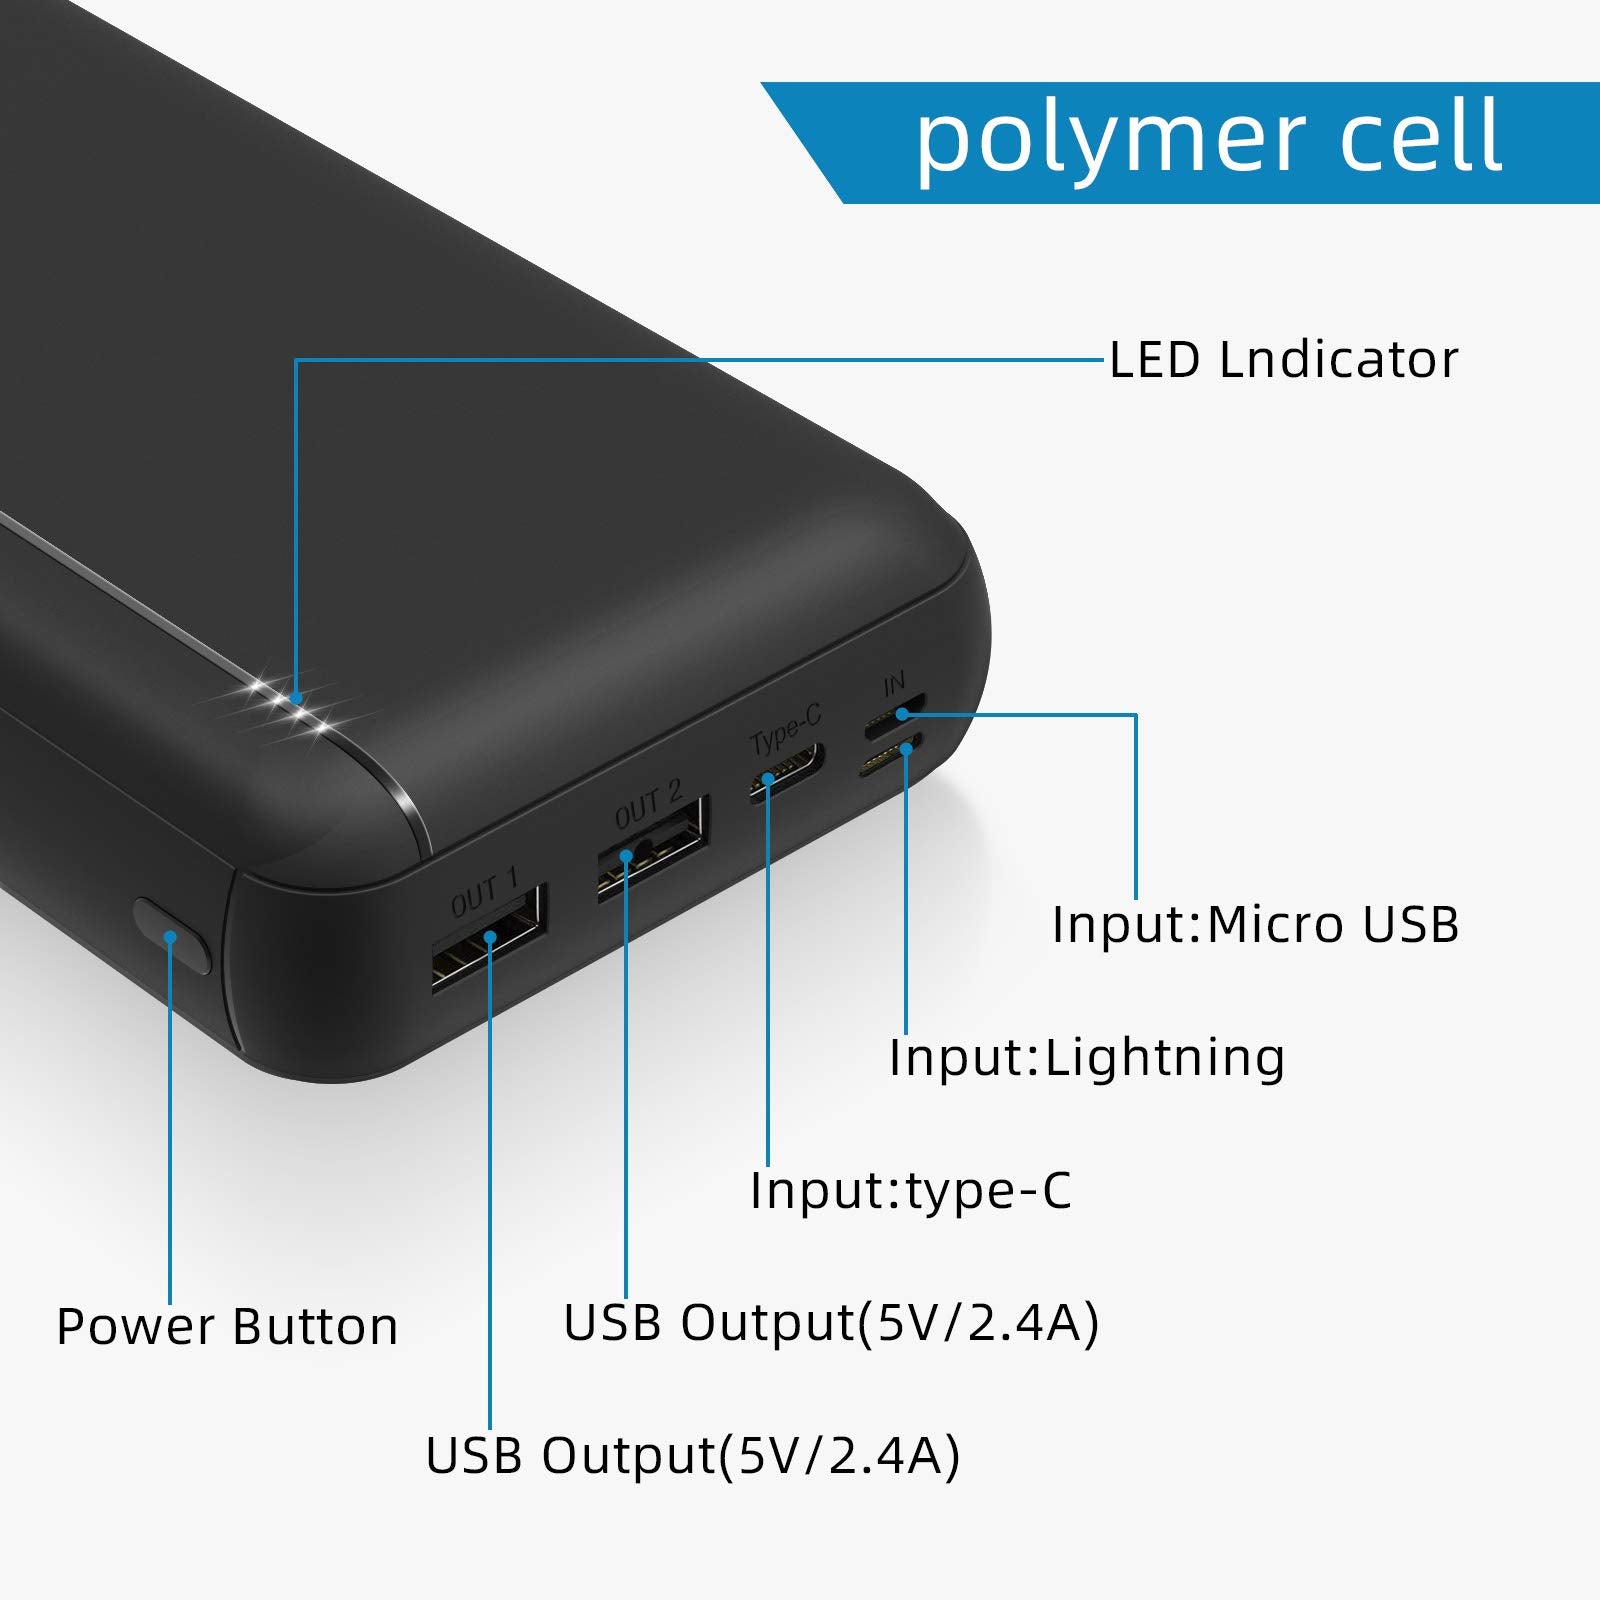 Power Bank 30000mAh 2 USB Fast Charging Ports Portable Charger External Battery Pack High Capacity Powerpack Compatible for iPhone iPad Pro Samsung Galaxy Android Mobile Phone Niendo Switch Tablet